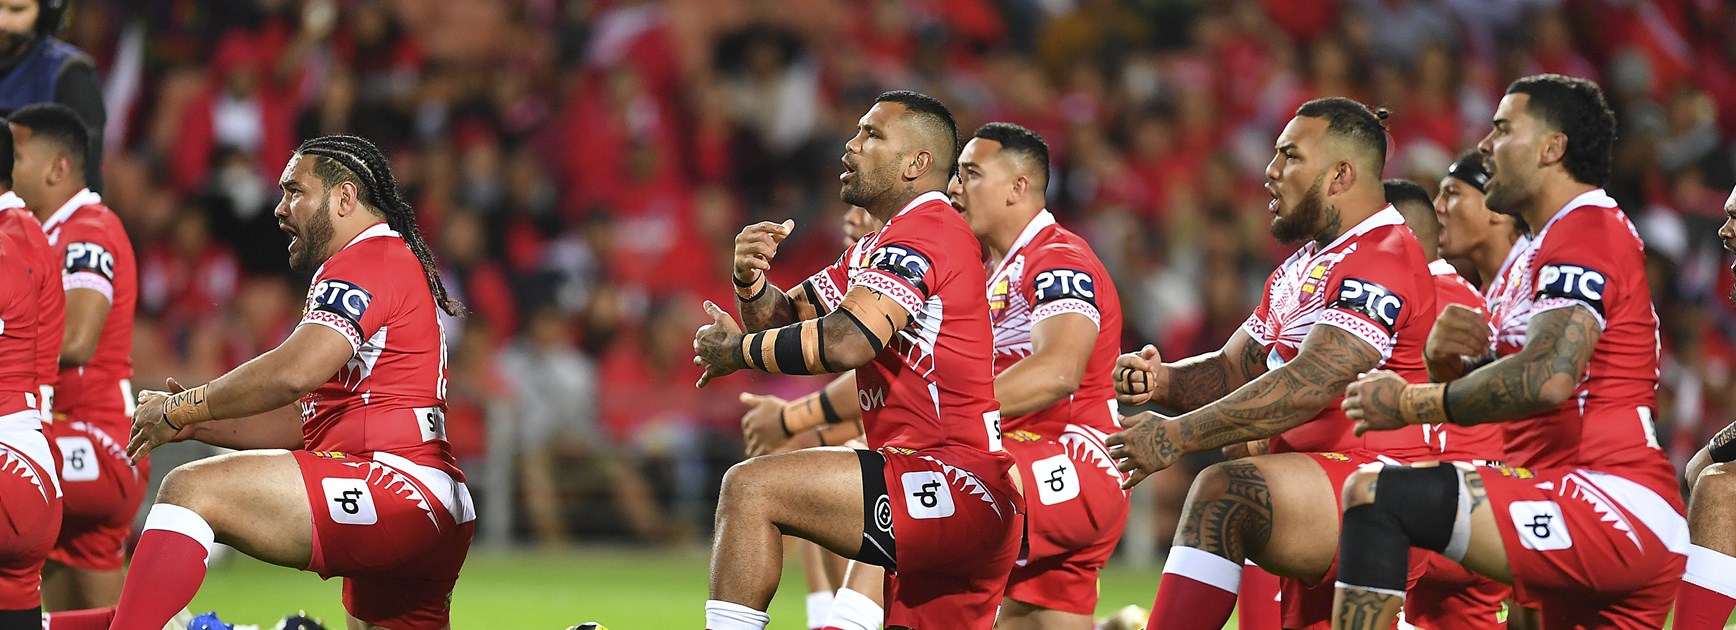 Legal action withdrawn, helping pave way for Tonga to reunite